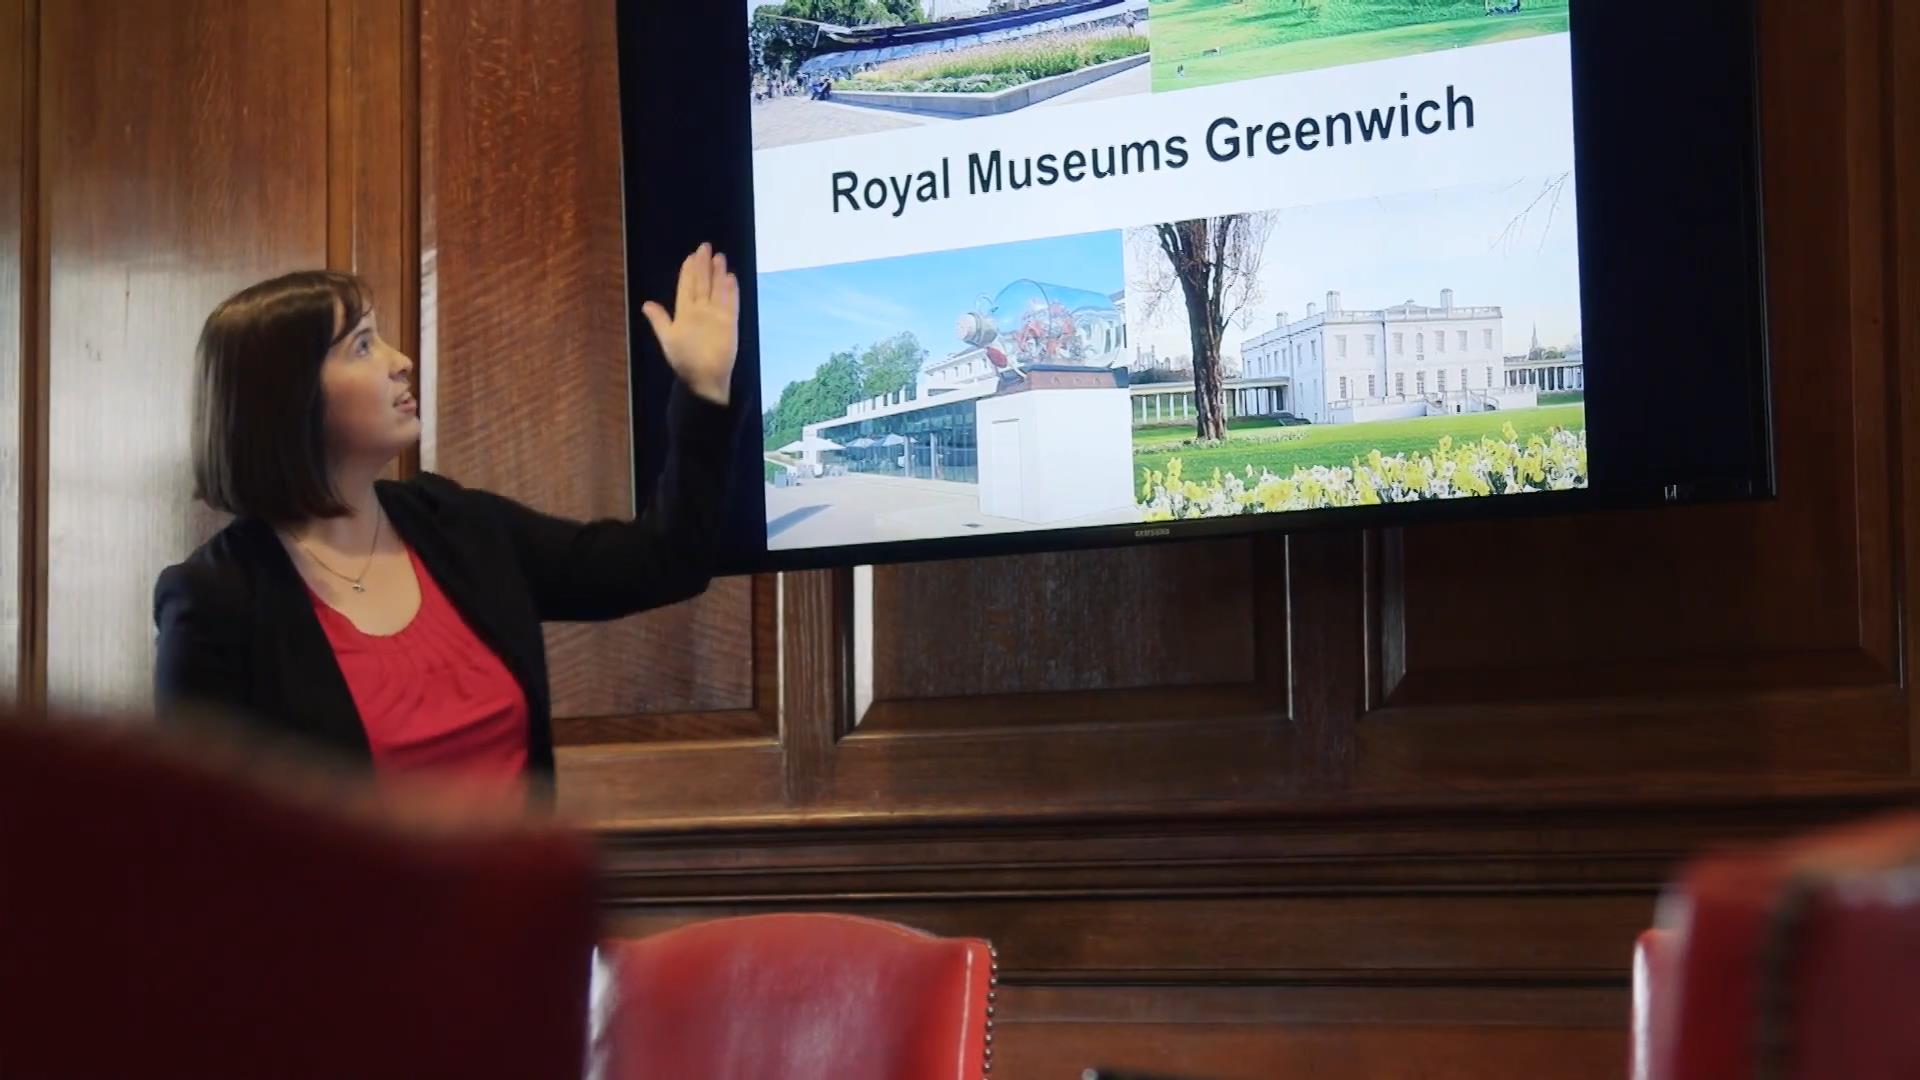 An employee at Royal Museums Greenwich gives a presentation.